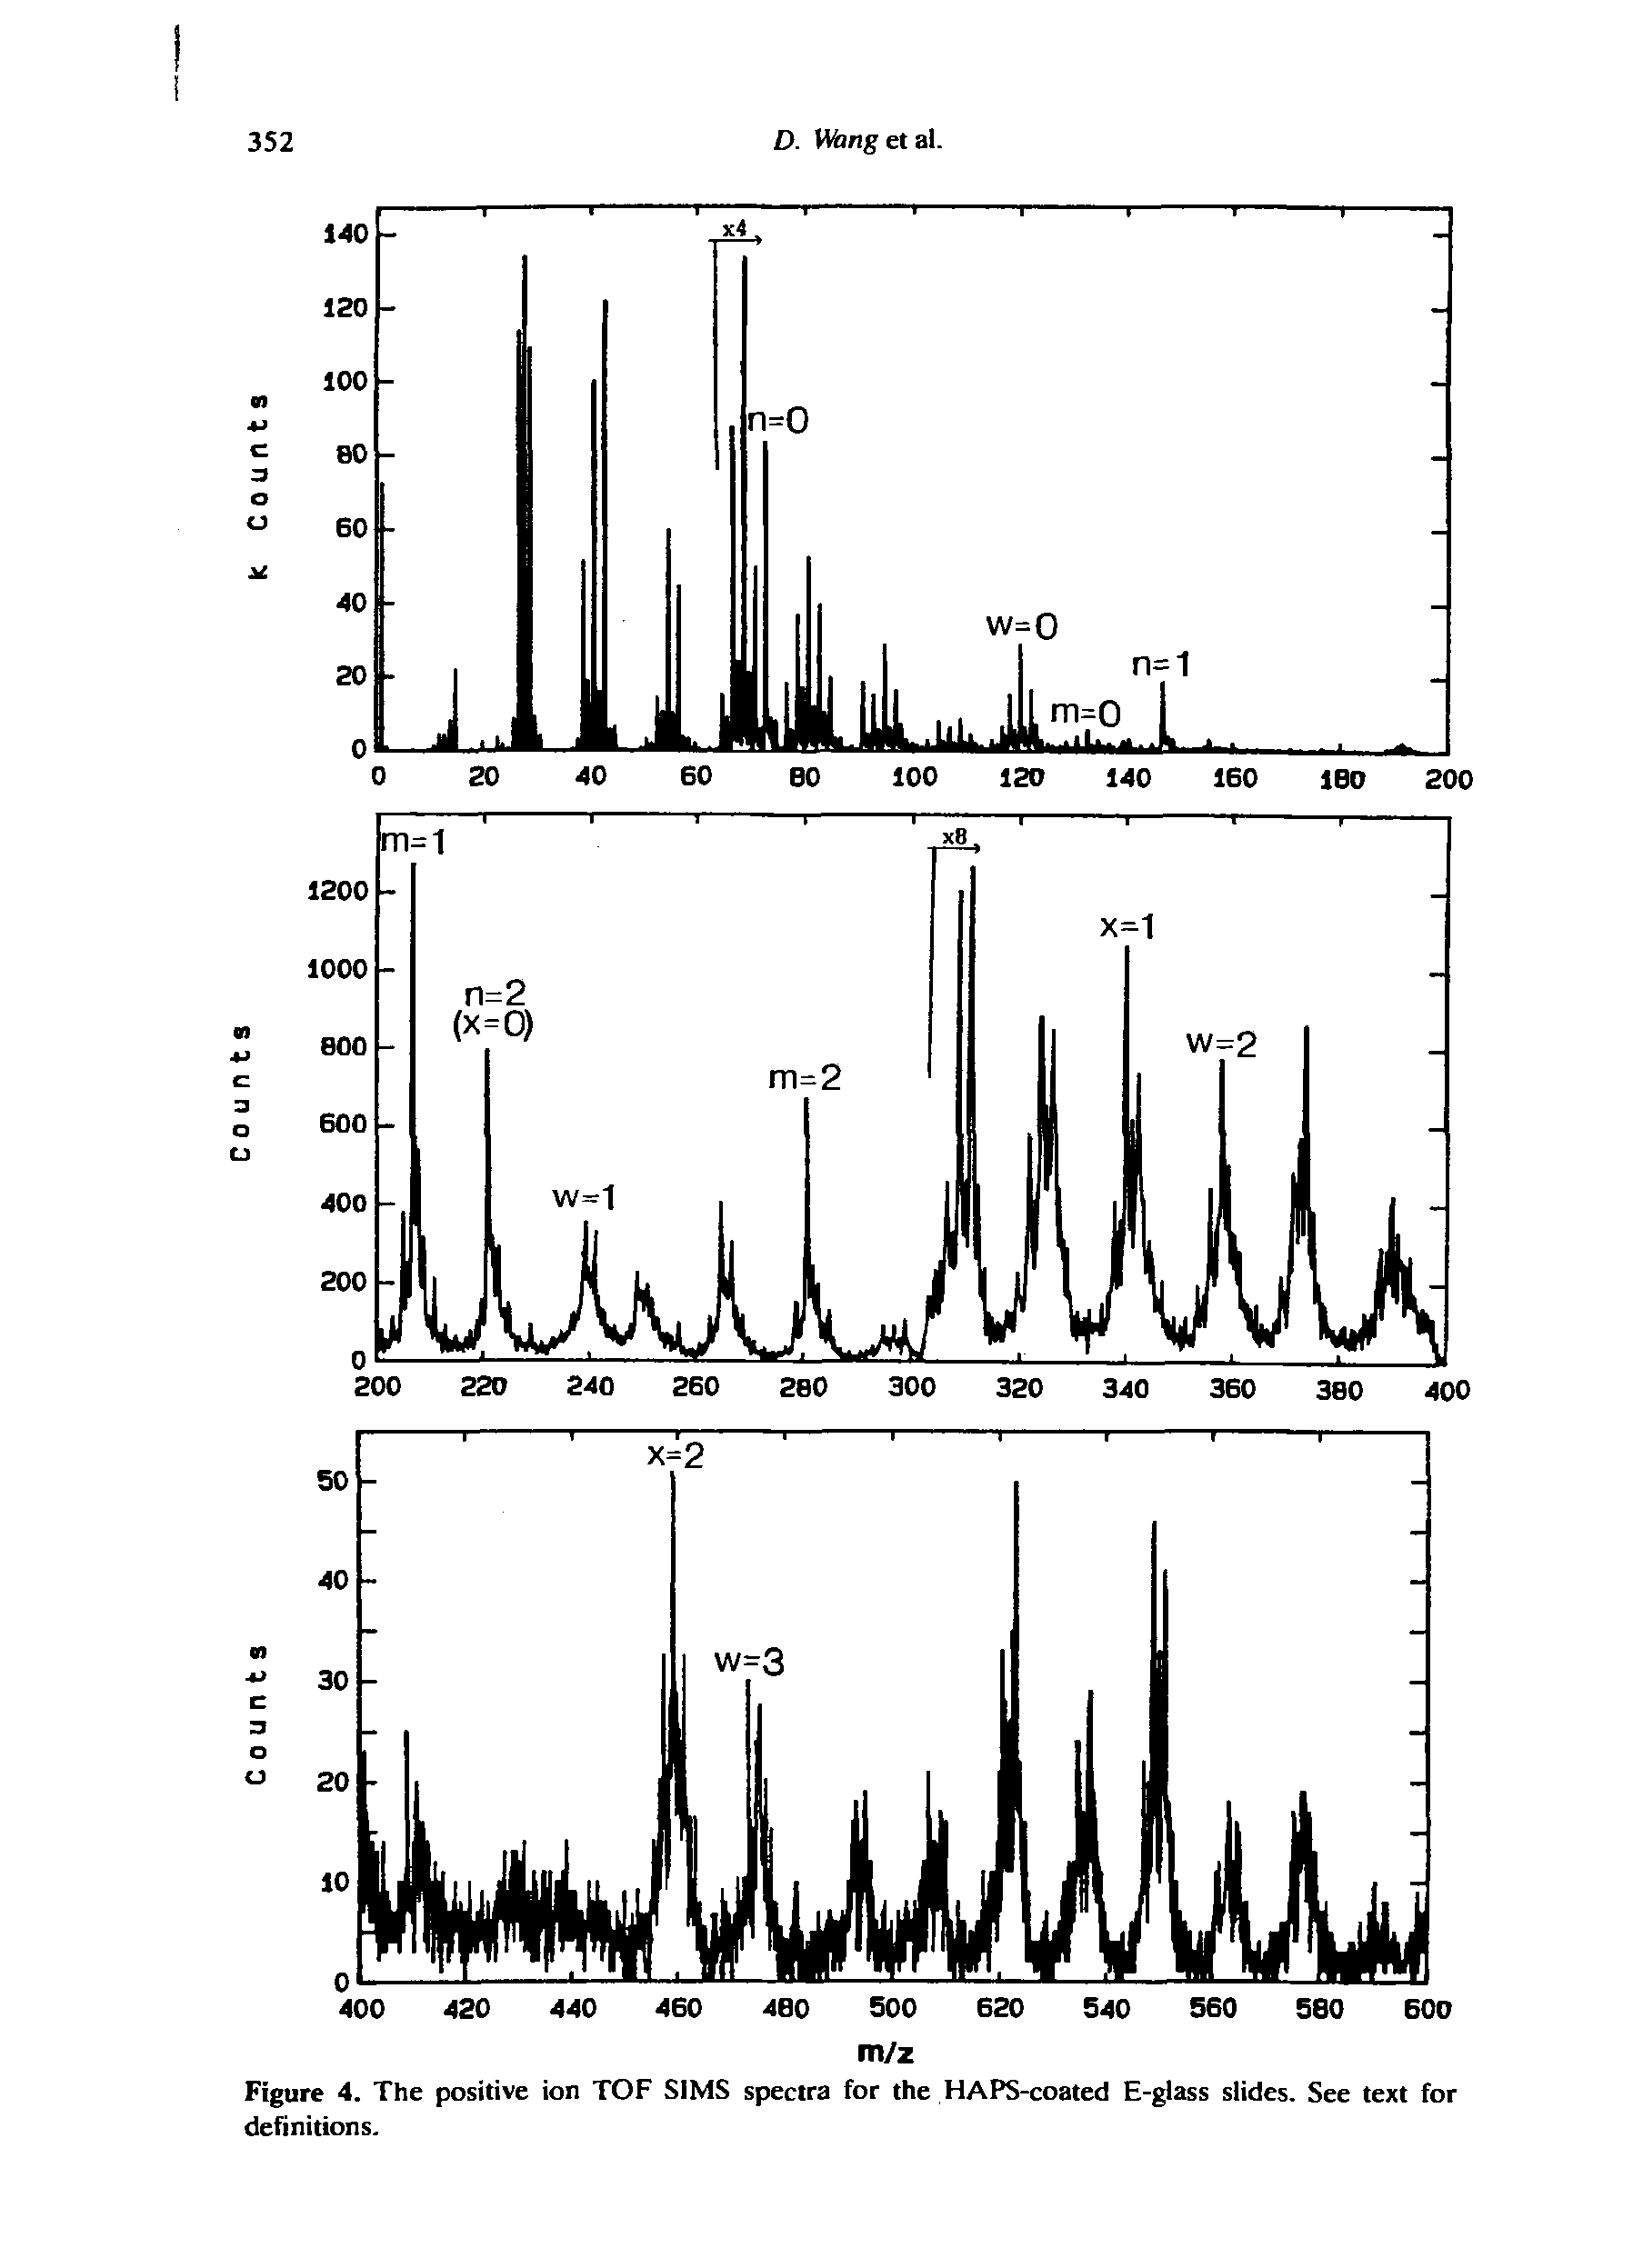 Figure 4. The positive ion TOF SIMS spectra for the HAPS-coated E-glass slides. See text for definitions.